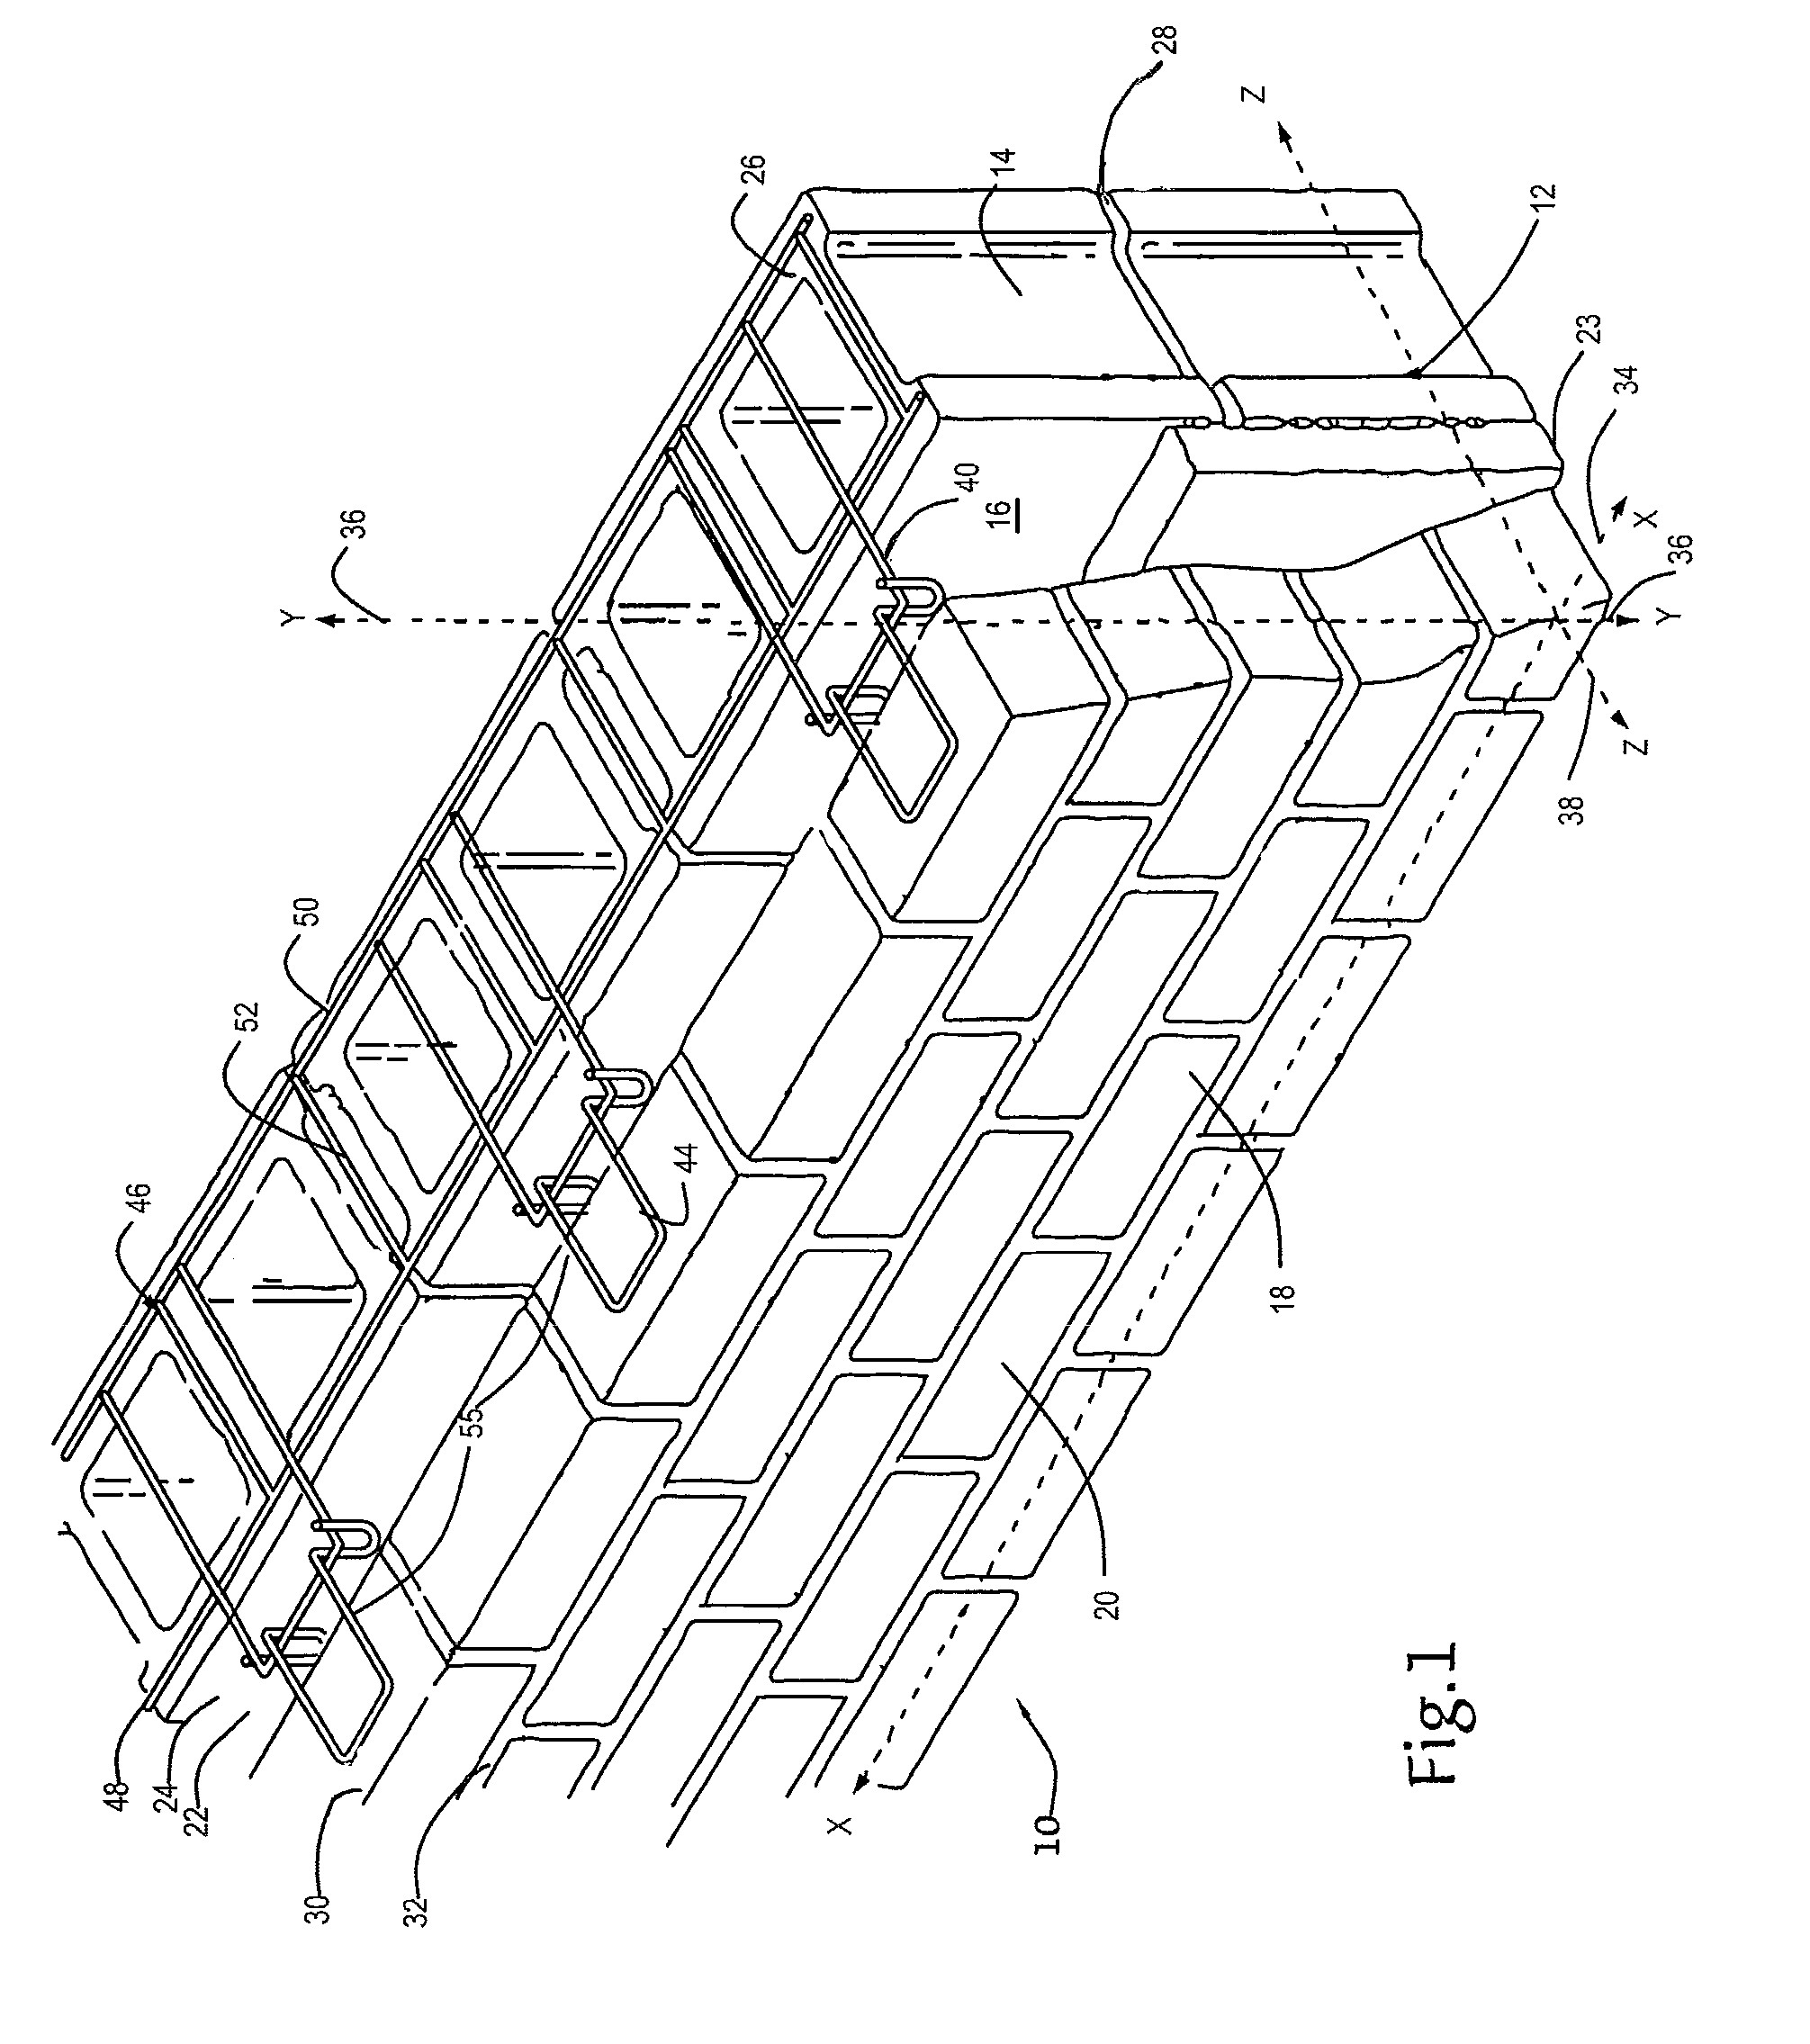 Vertically adjustable disengagement prevention veneer tie and anchoring system utilizing the same